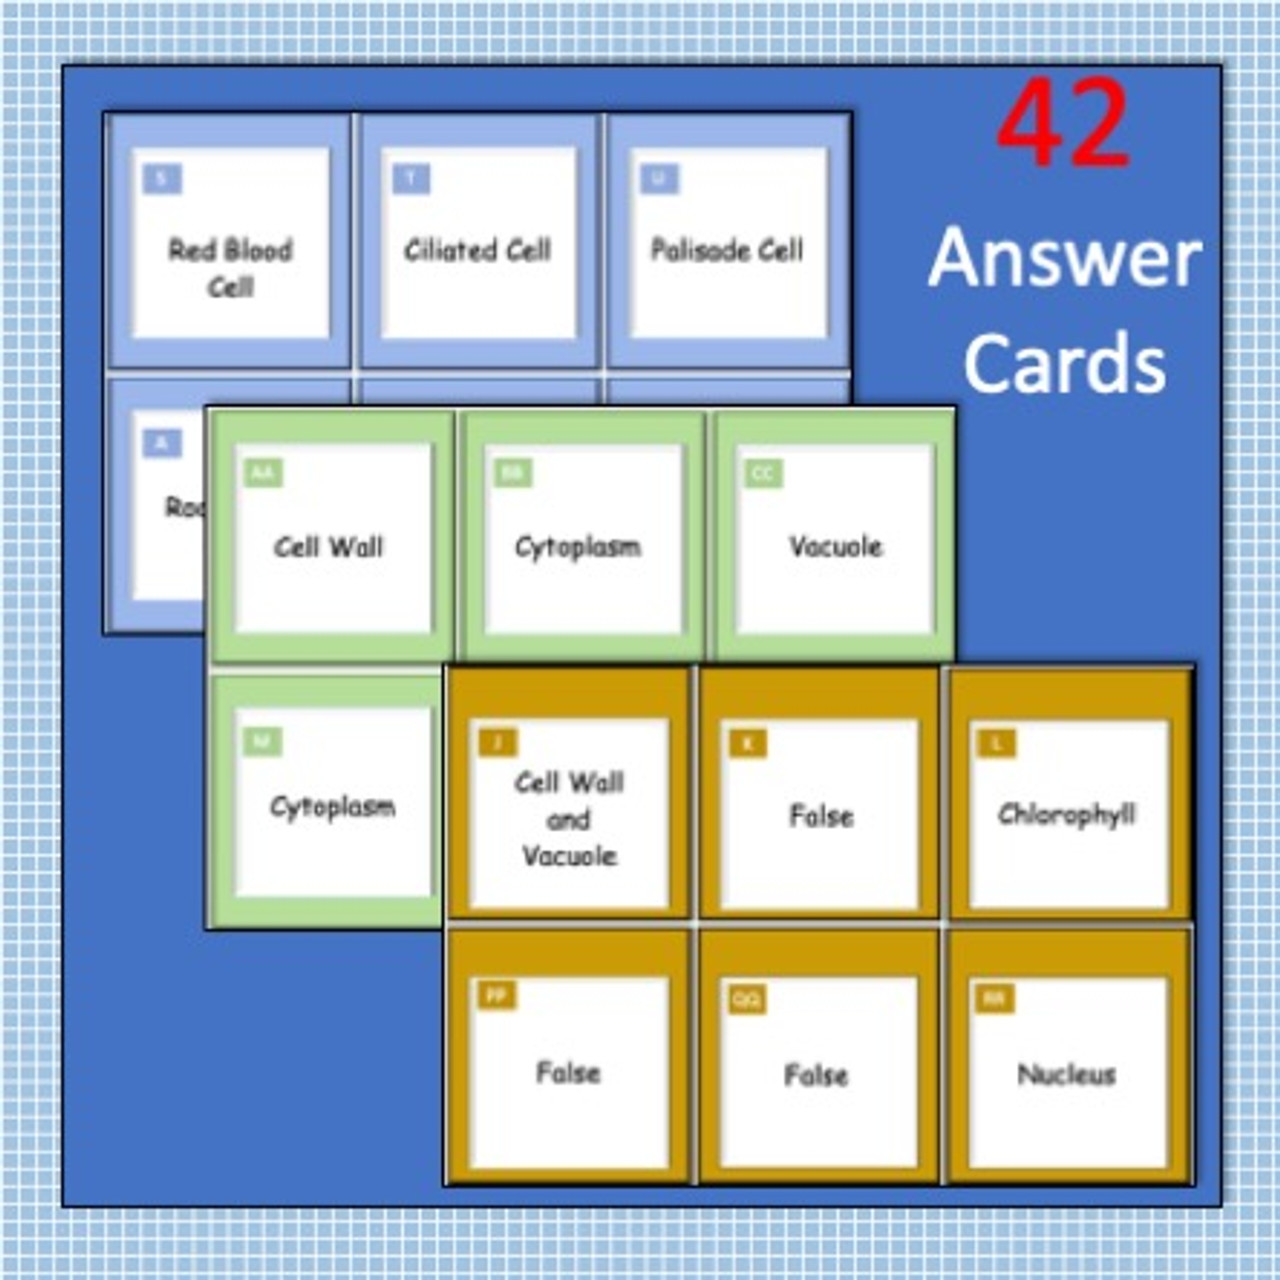 Plant and Animal Cells - 42 Question Card Sort Team Game - FREE